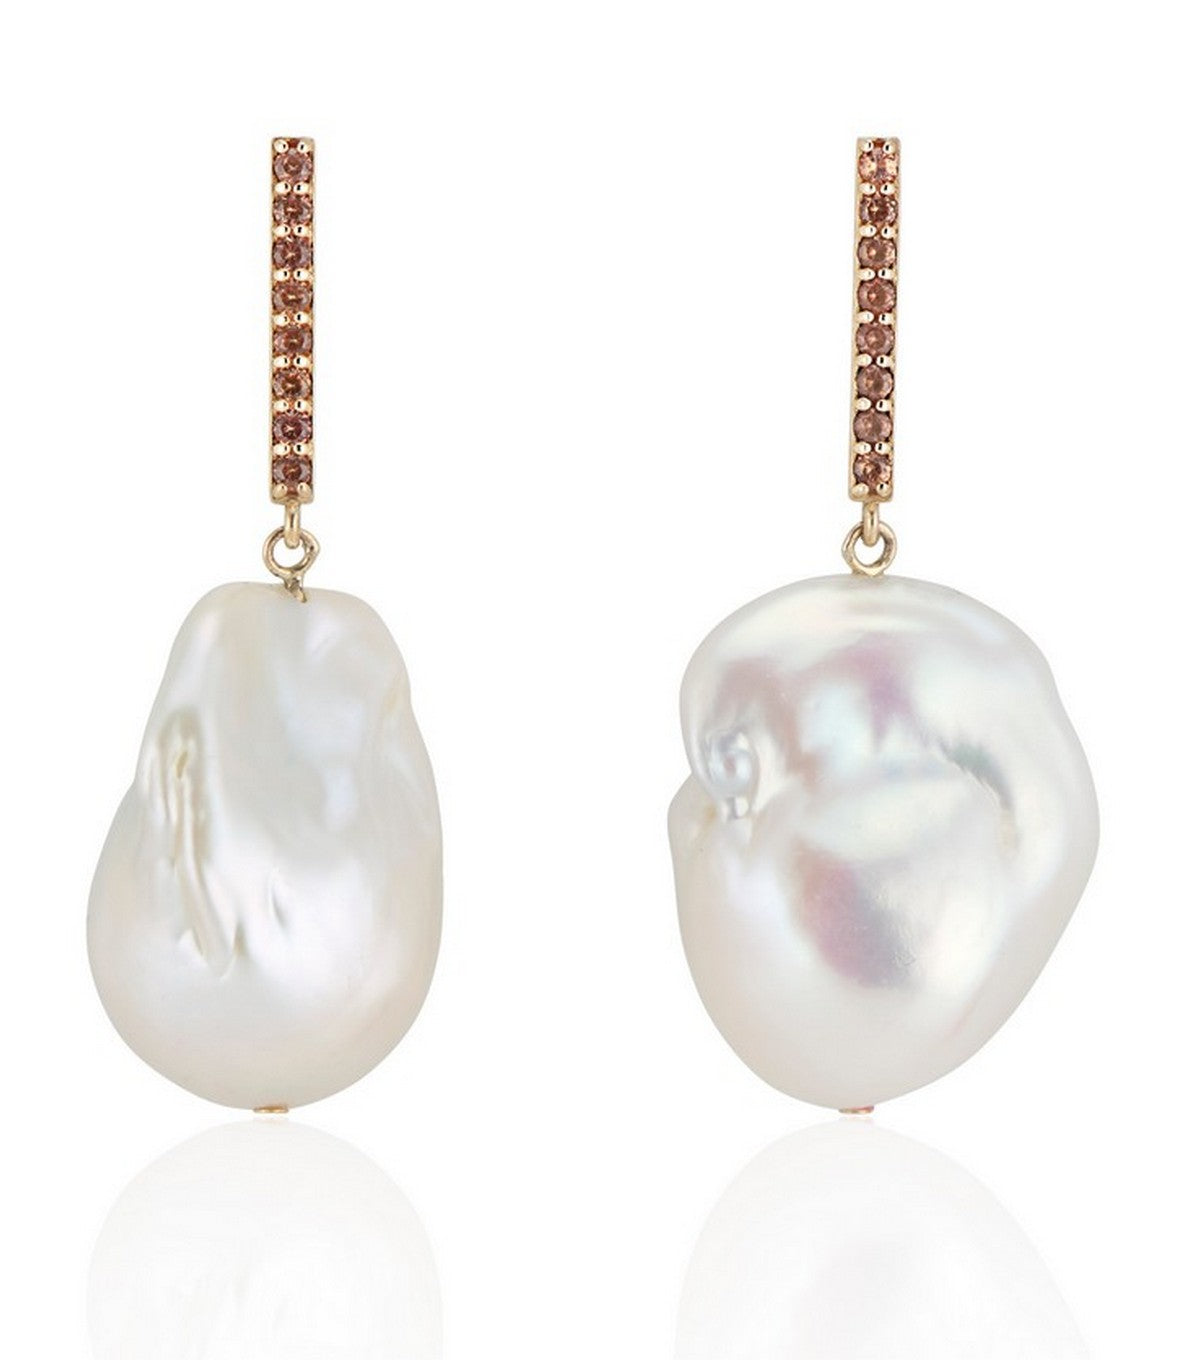 14K White Gold Vertical Bar with Sapphires and Baroque Pearl Drop Earrings - Thomas Laine Jewelry